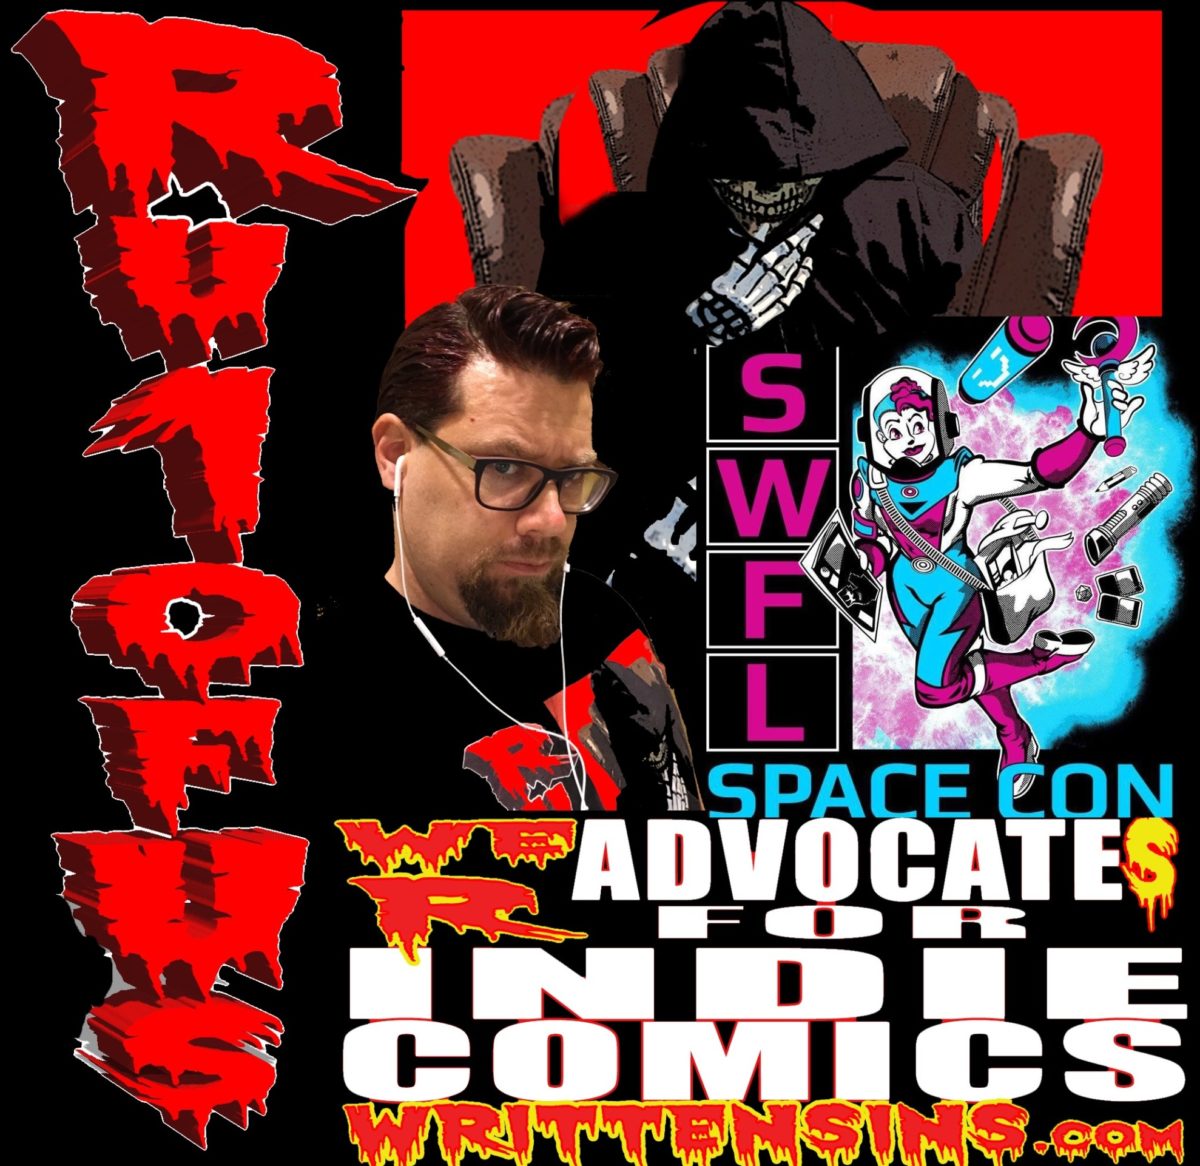 COMIC CON HIGHWAY FLORIDA EXIT:  Fort Myers, MR ANdersin and WrittenSiNs: A Written SiNs Adopted Home Show, SWFL SPACE COMIC CON June 16-17  -WrittenSiNs.com and MR Andersin Show  .  .